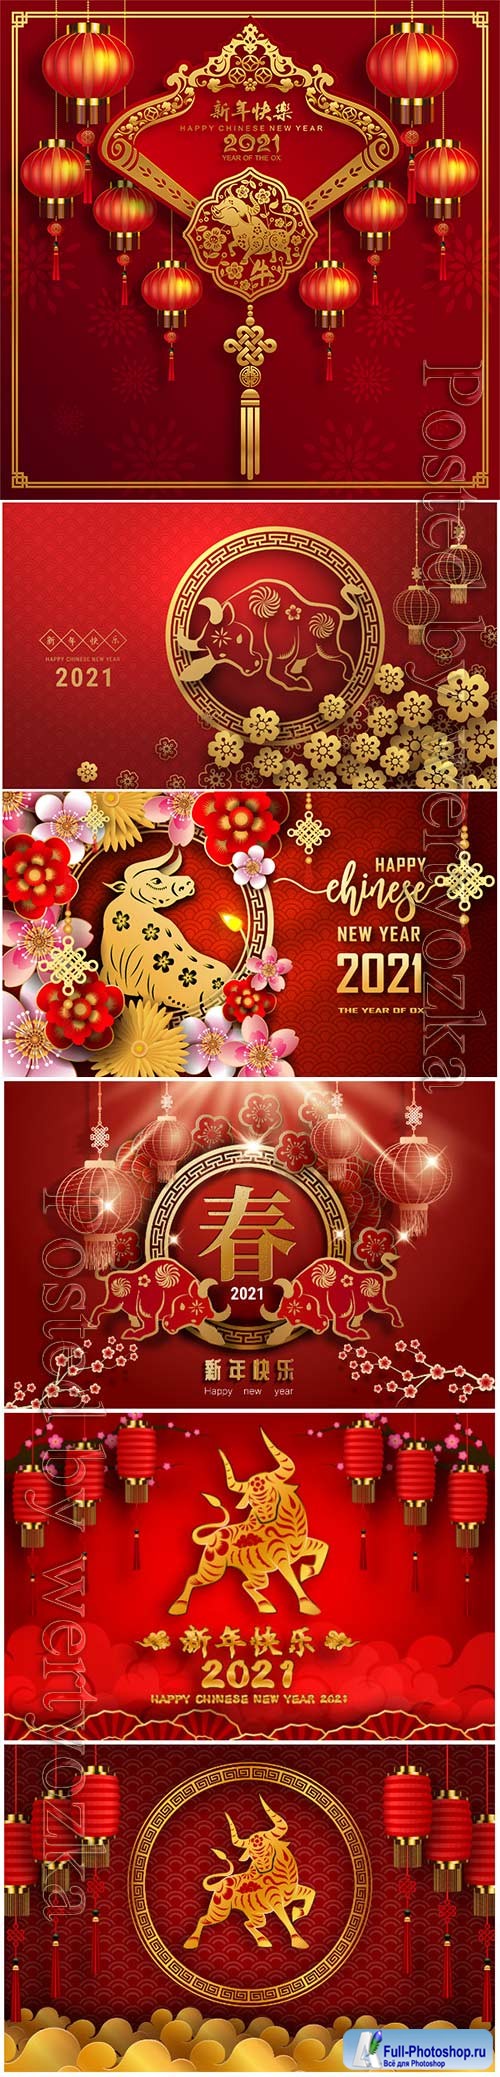 Chinese new year 2021 vector